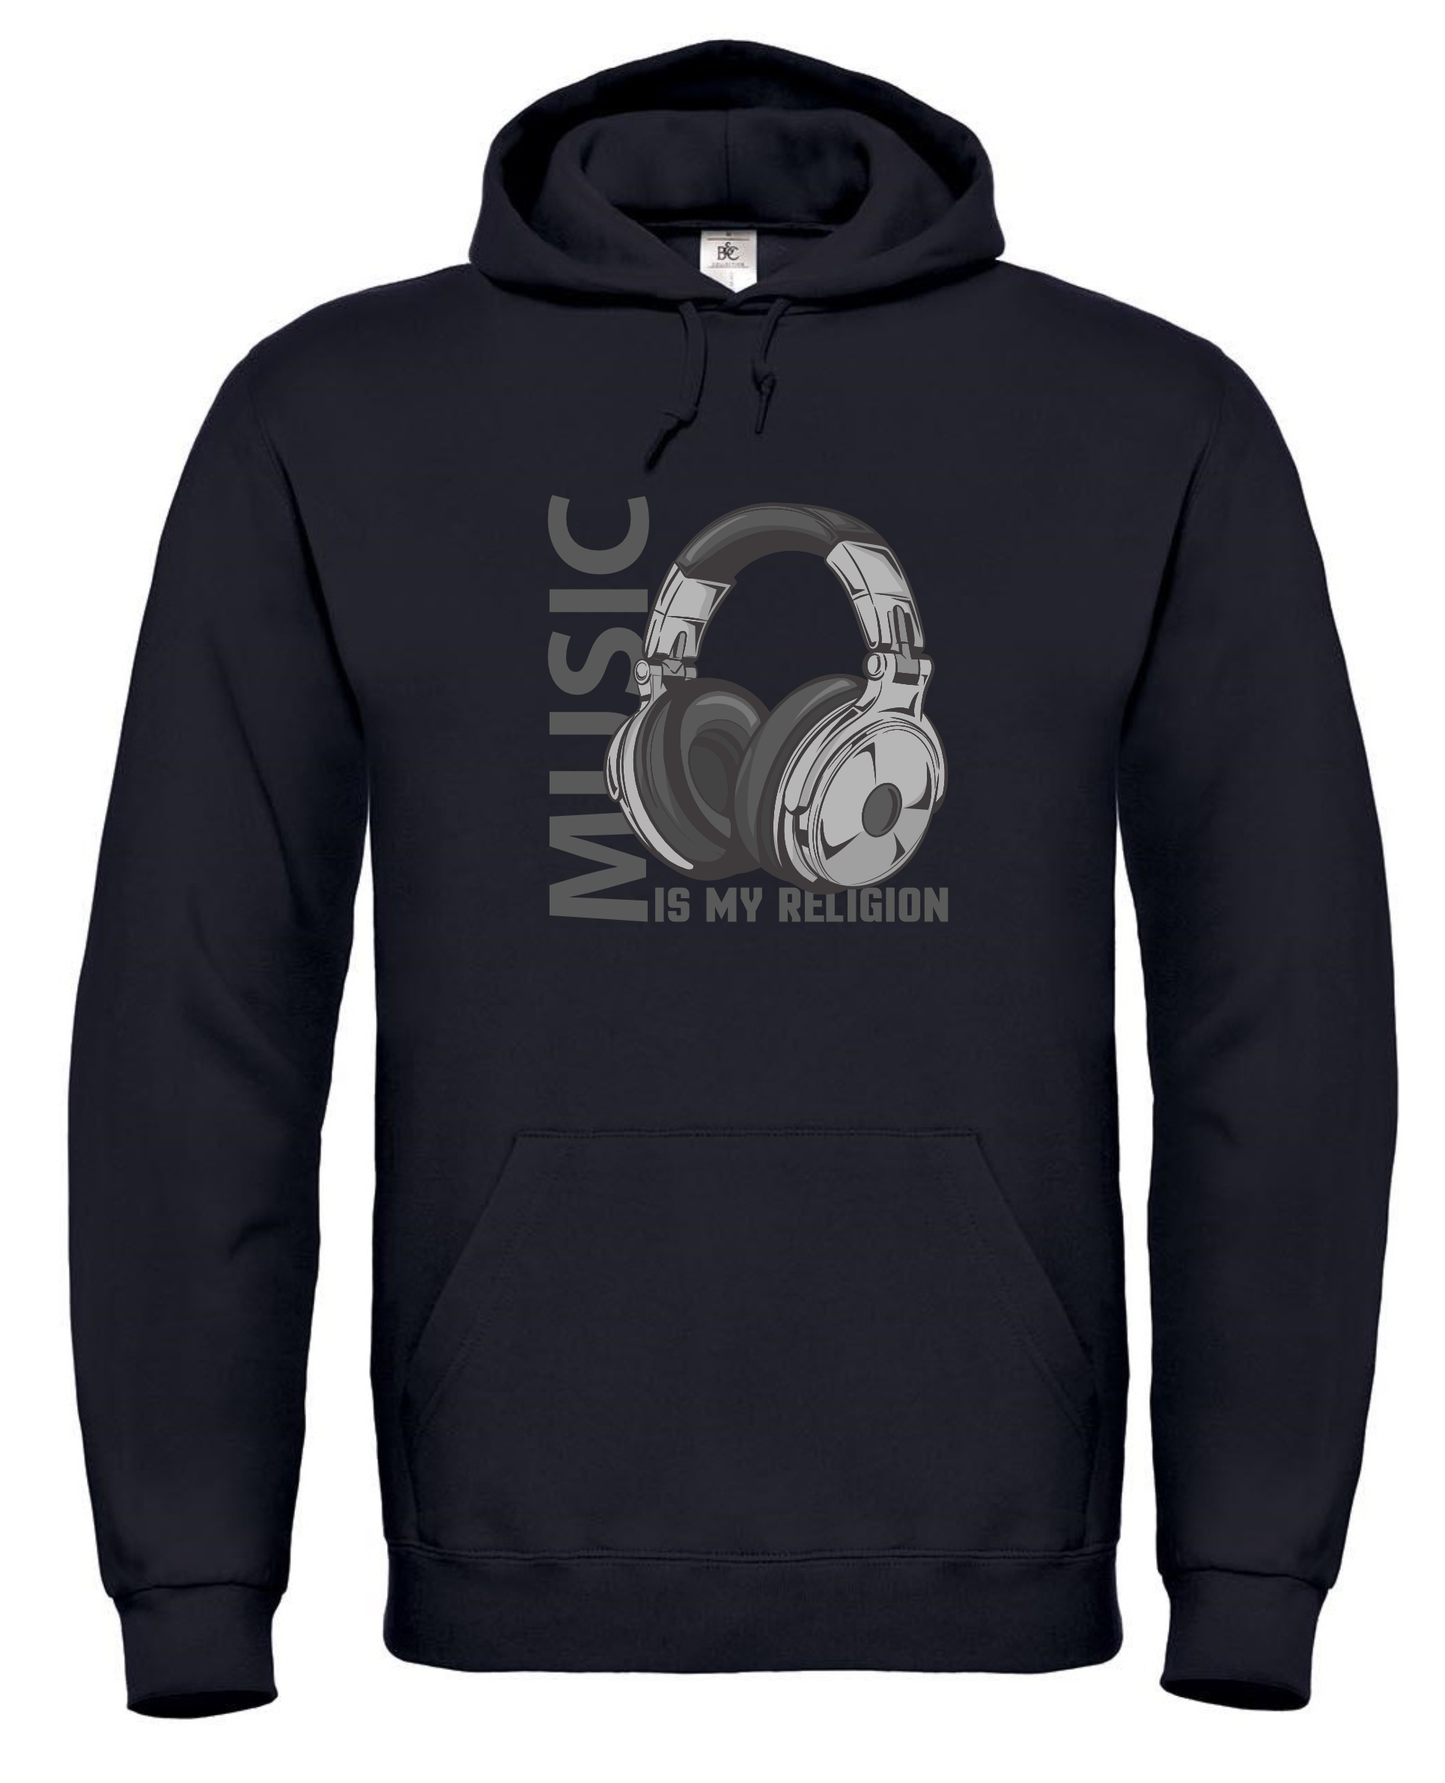 Music is my religion- Hoodie 4XL